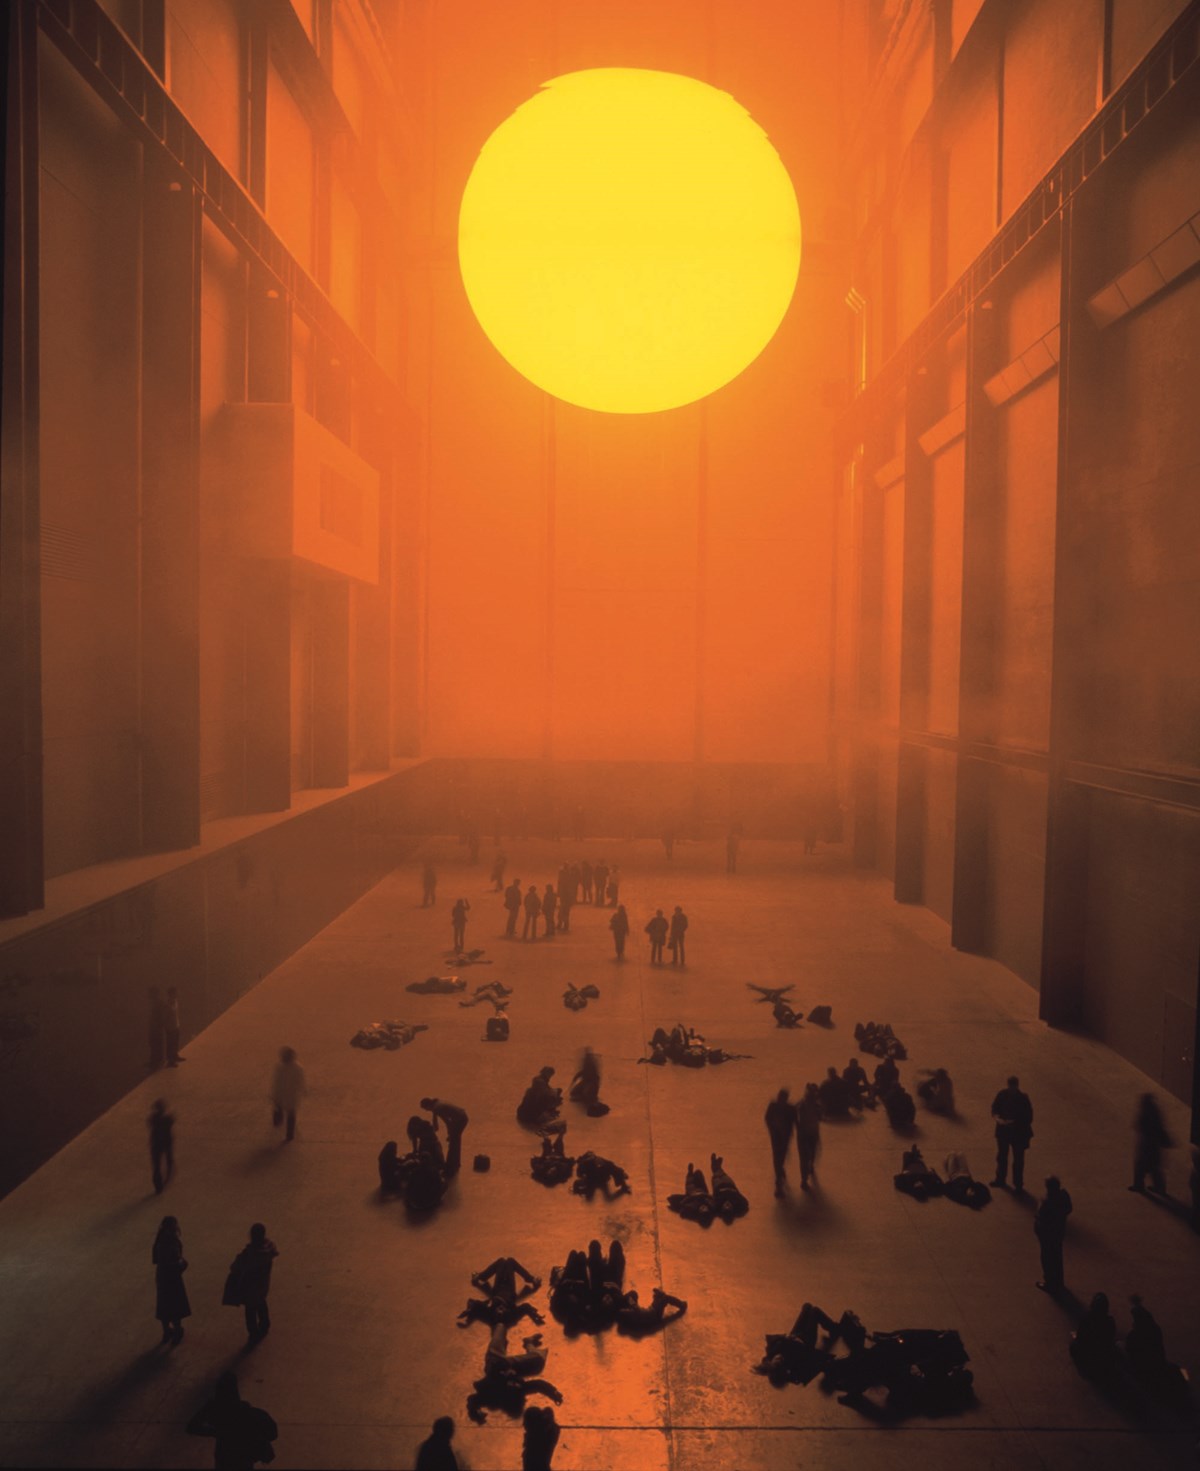 Olafur Eliasson, The Weather Project, 2003. Photo by Andrew Dunkley & Marcus Leith